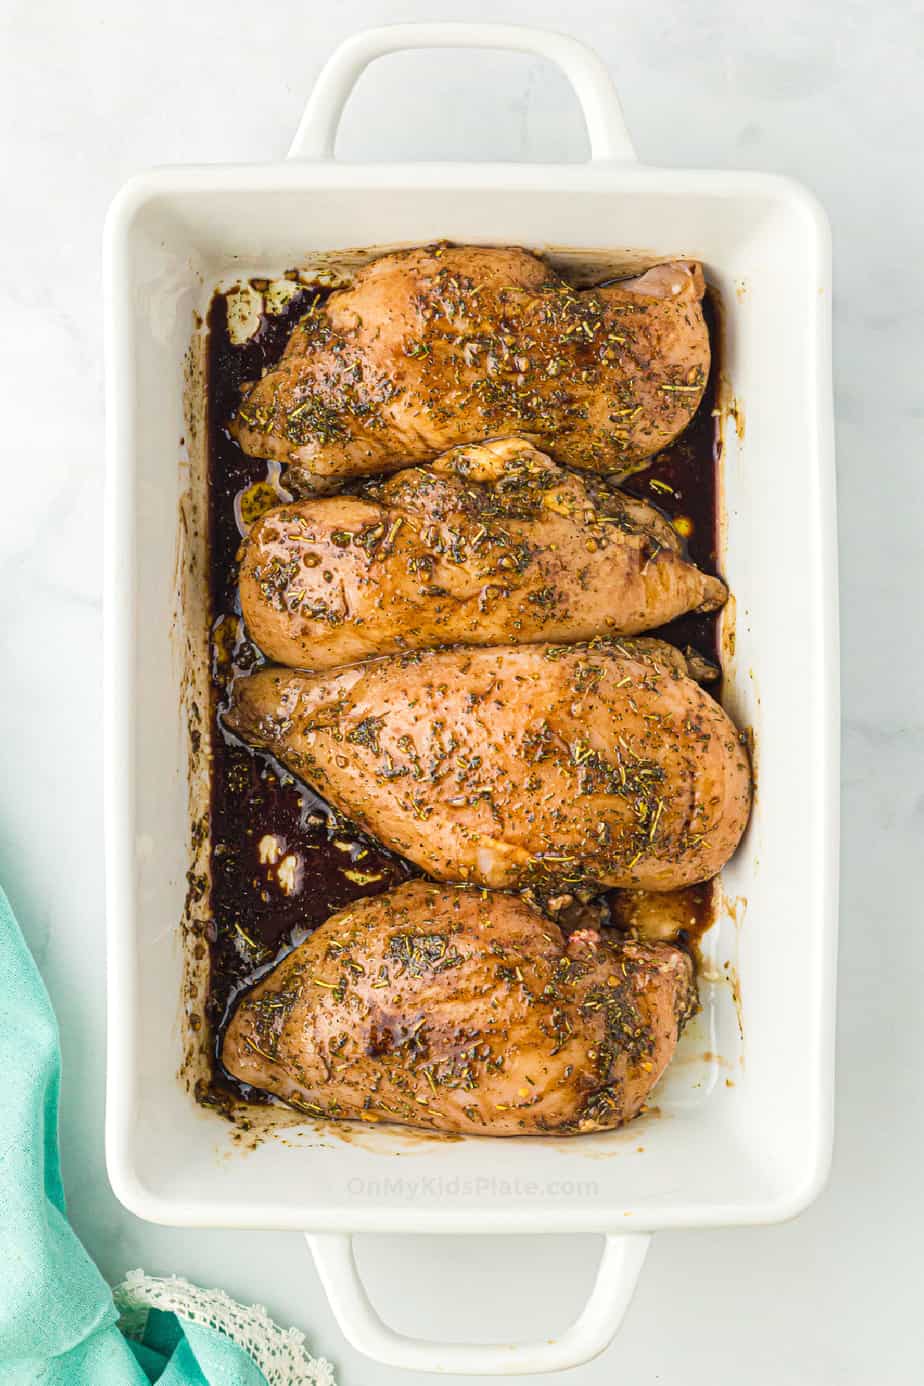 Baked chicken breasts in a balsamic sauce with herbs in a baking dish